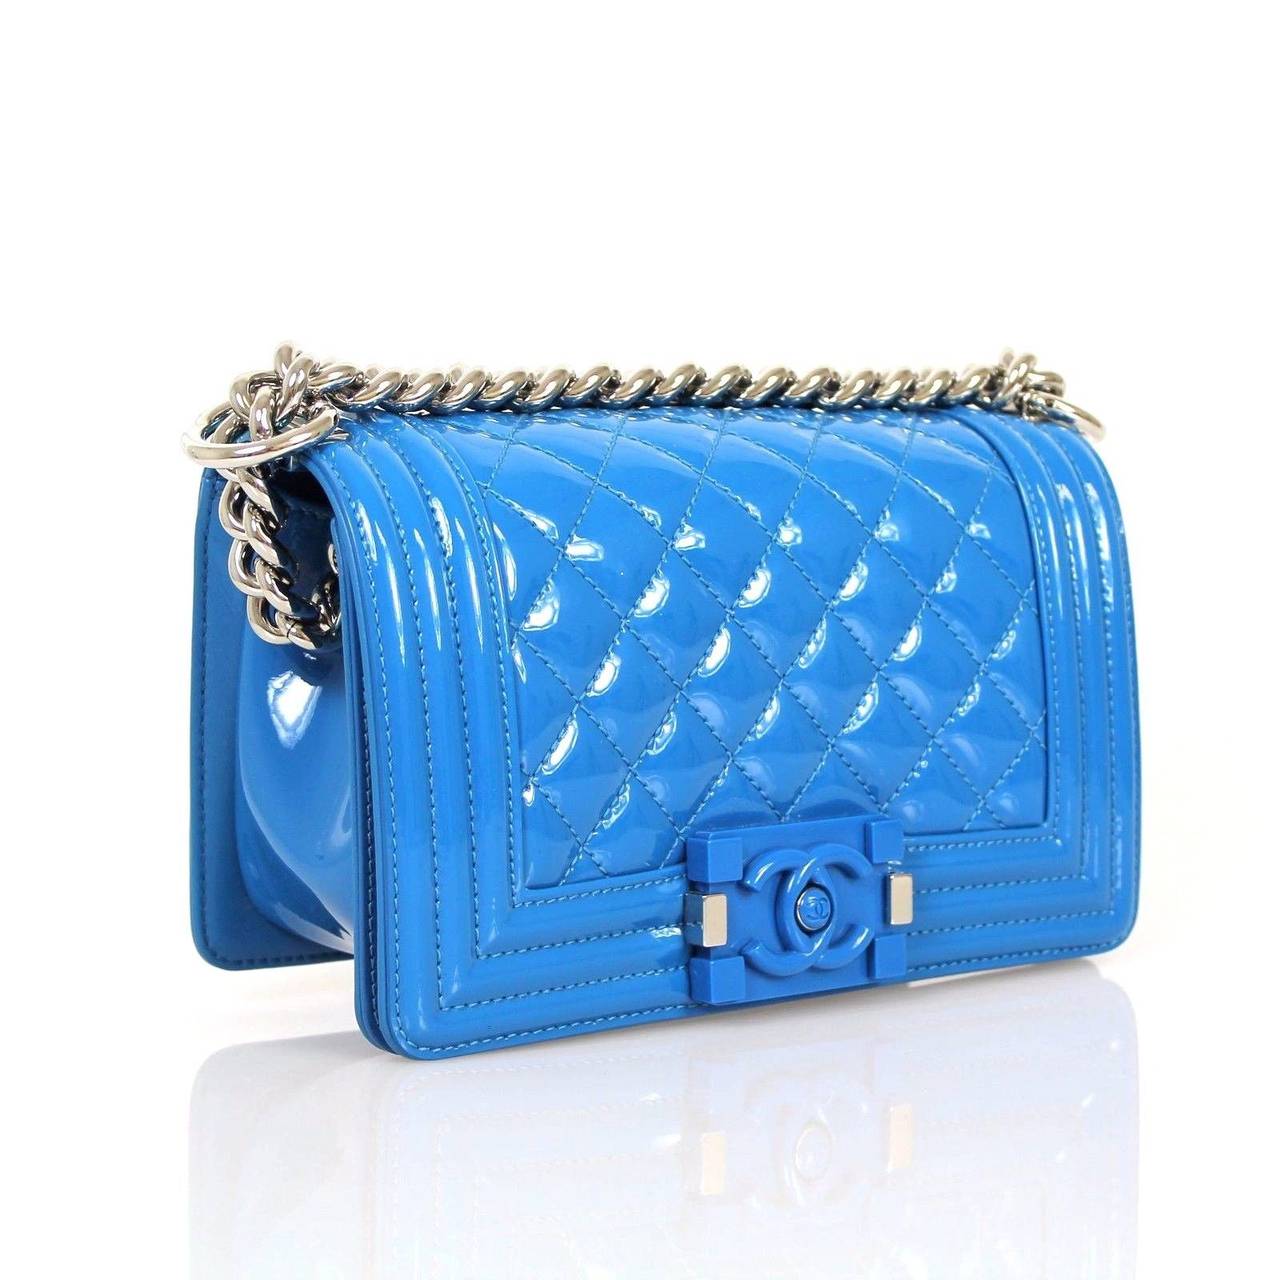 Chanel Patent Boy Bags for the Cruise 2015 Collection. The boy is made in a very shiny patent leather in royal blue candy color with a plexi glass closure and silver hardware. The exterior almost gives it a synthetic look to the otherwise leather